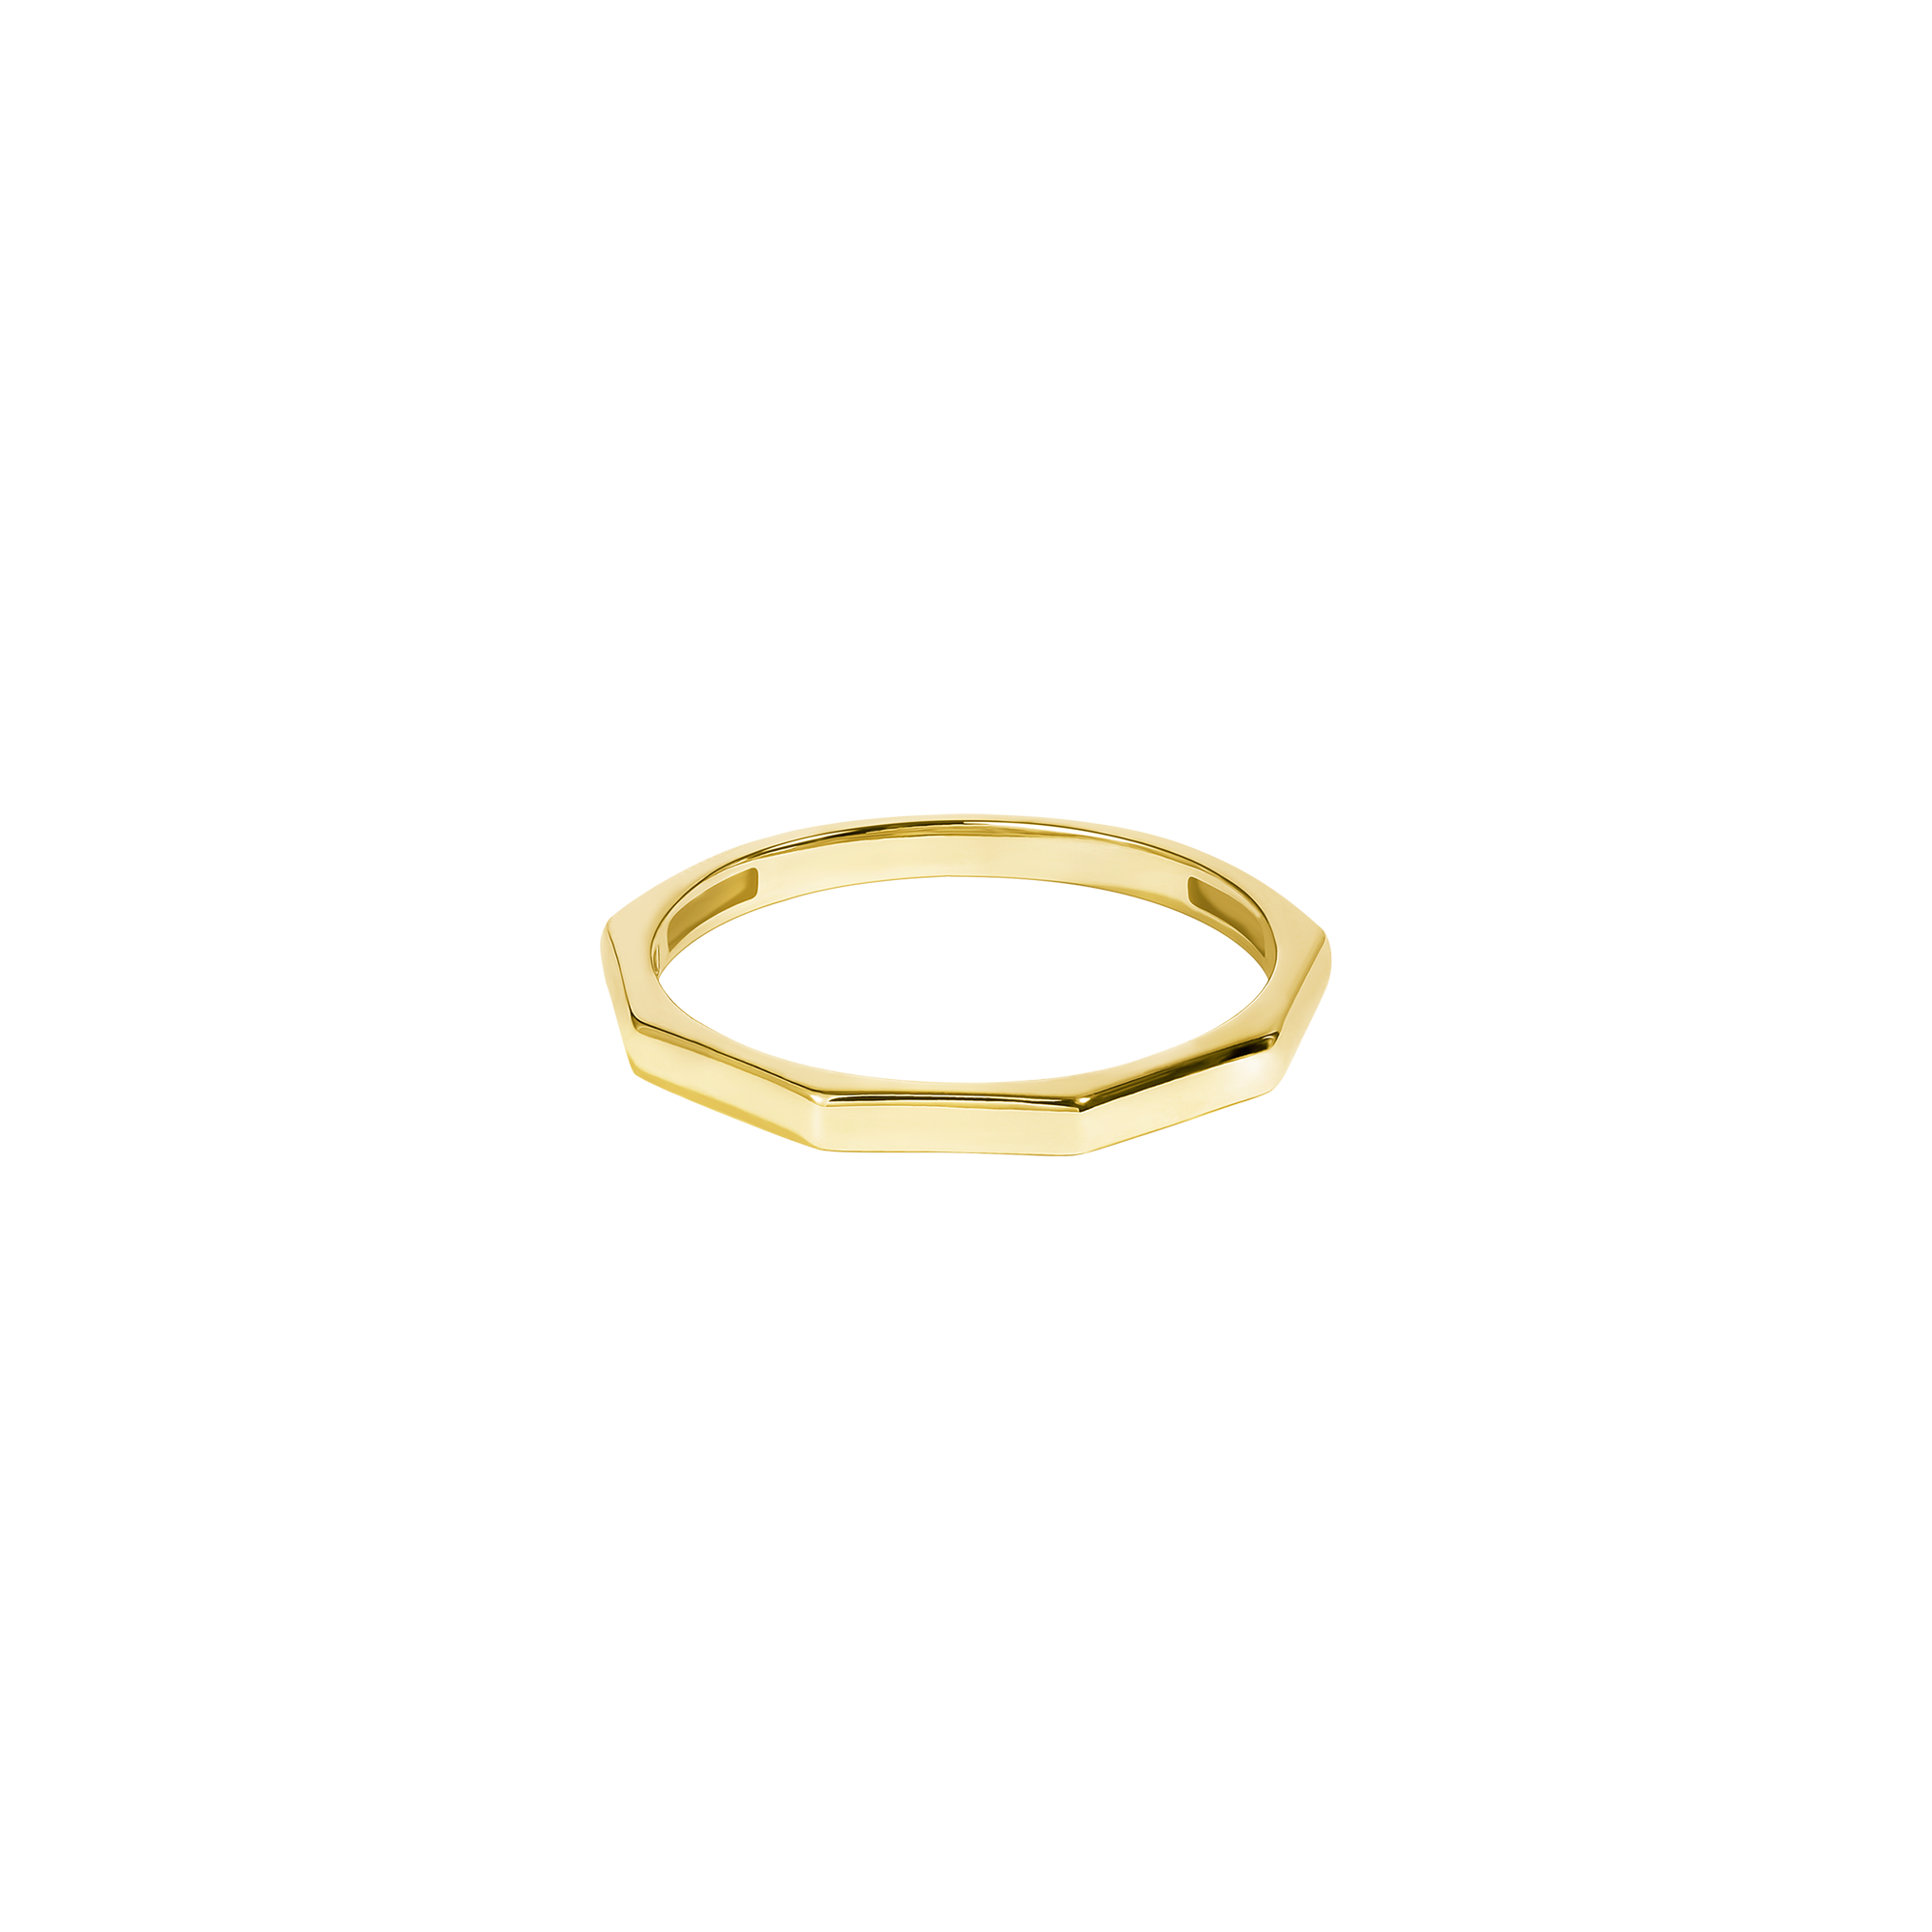 Solid Gold Geometric Simplicity Ring